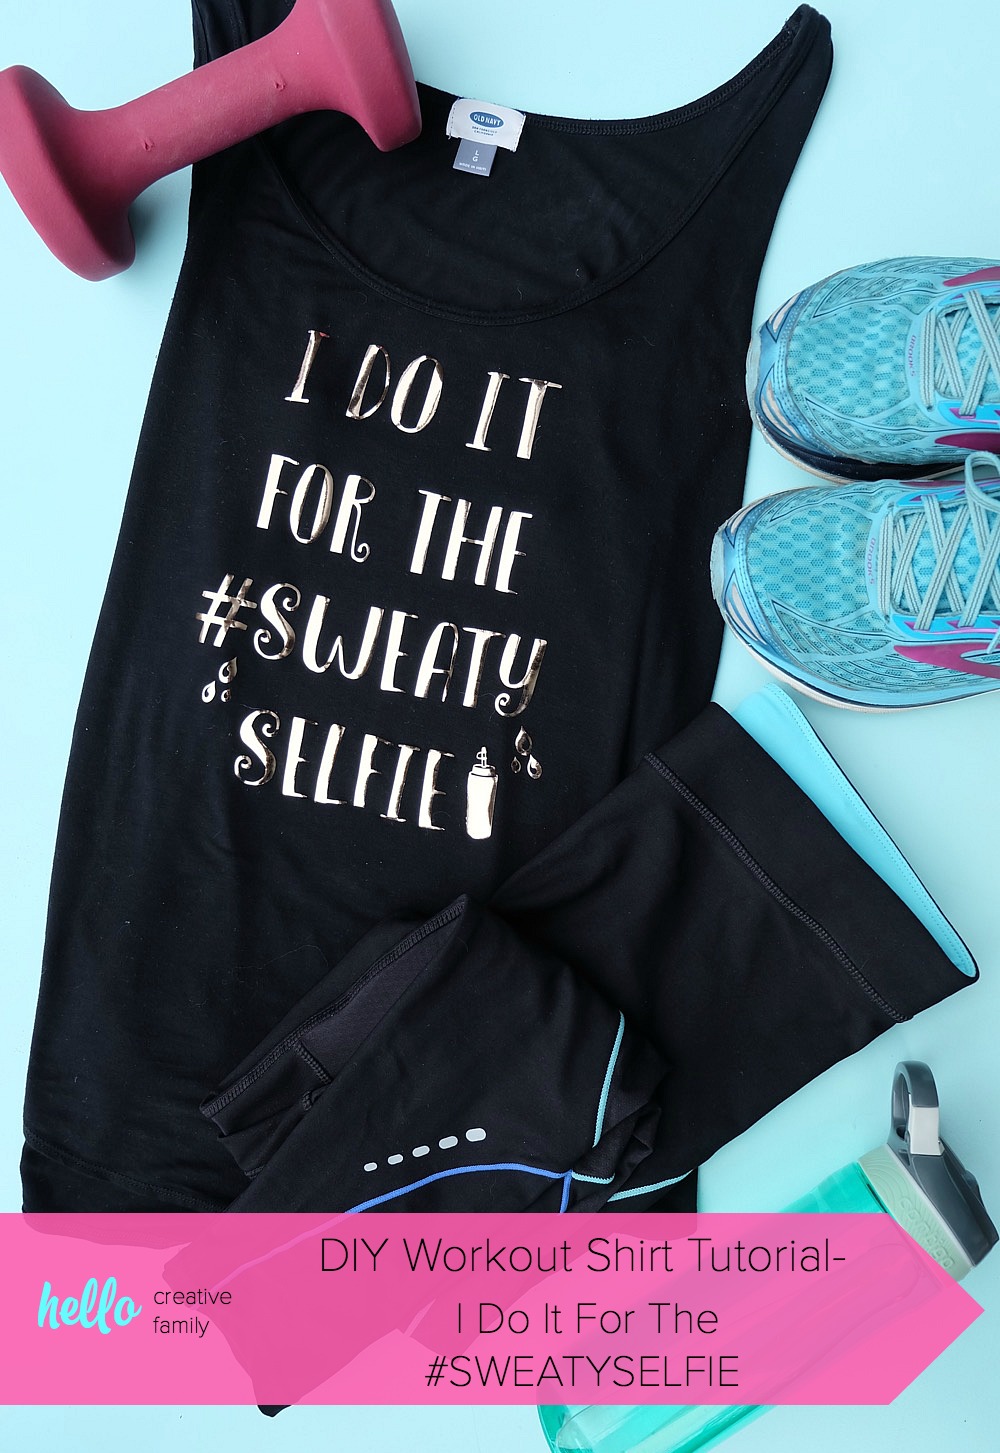 Having cute workout gear makes it even more fun to workout! Create this adorable DIY Workout Shirt that says "I do it for the #SweatySelfie" to keep you motivated at the gym! This post has a free cut file along with a step by step tutorial with photos for making this easy project using your Cricut! #CricutMade #Fitness #FitnessGear #Crafts #CricutProject